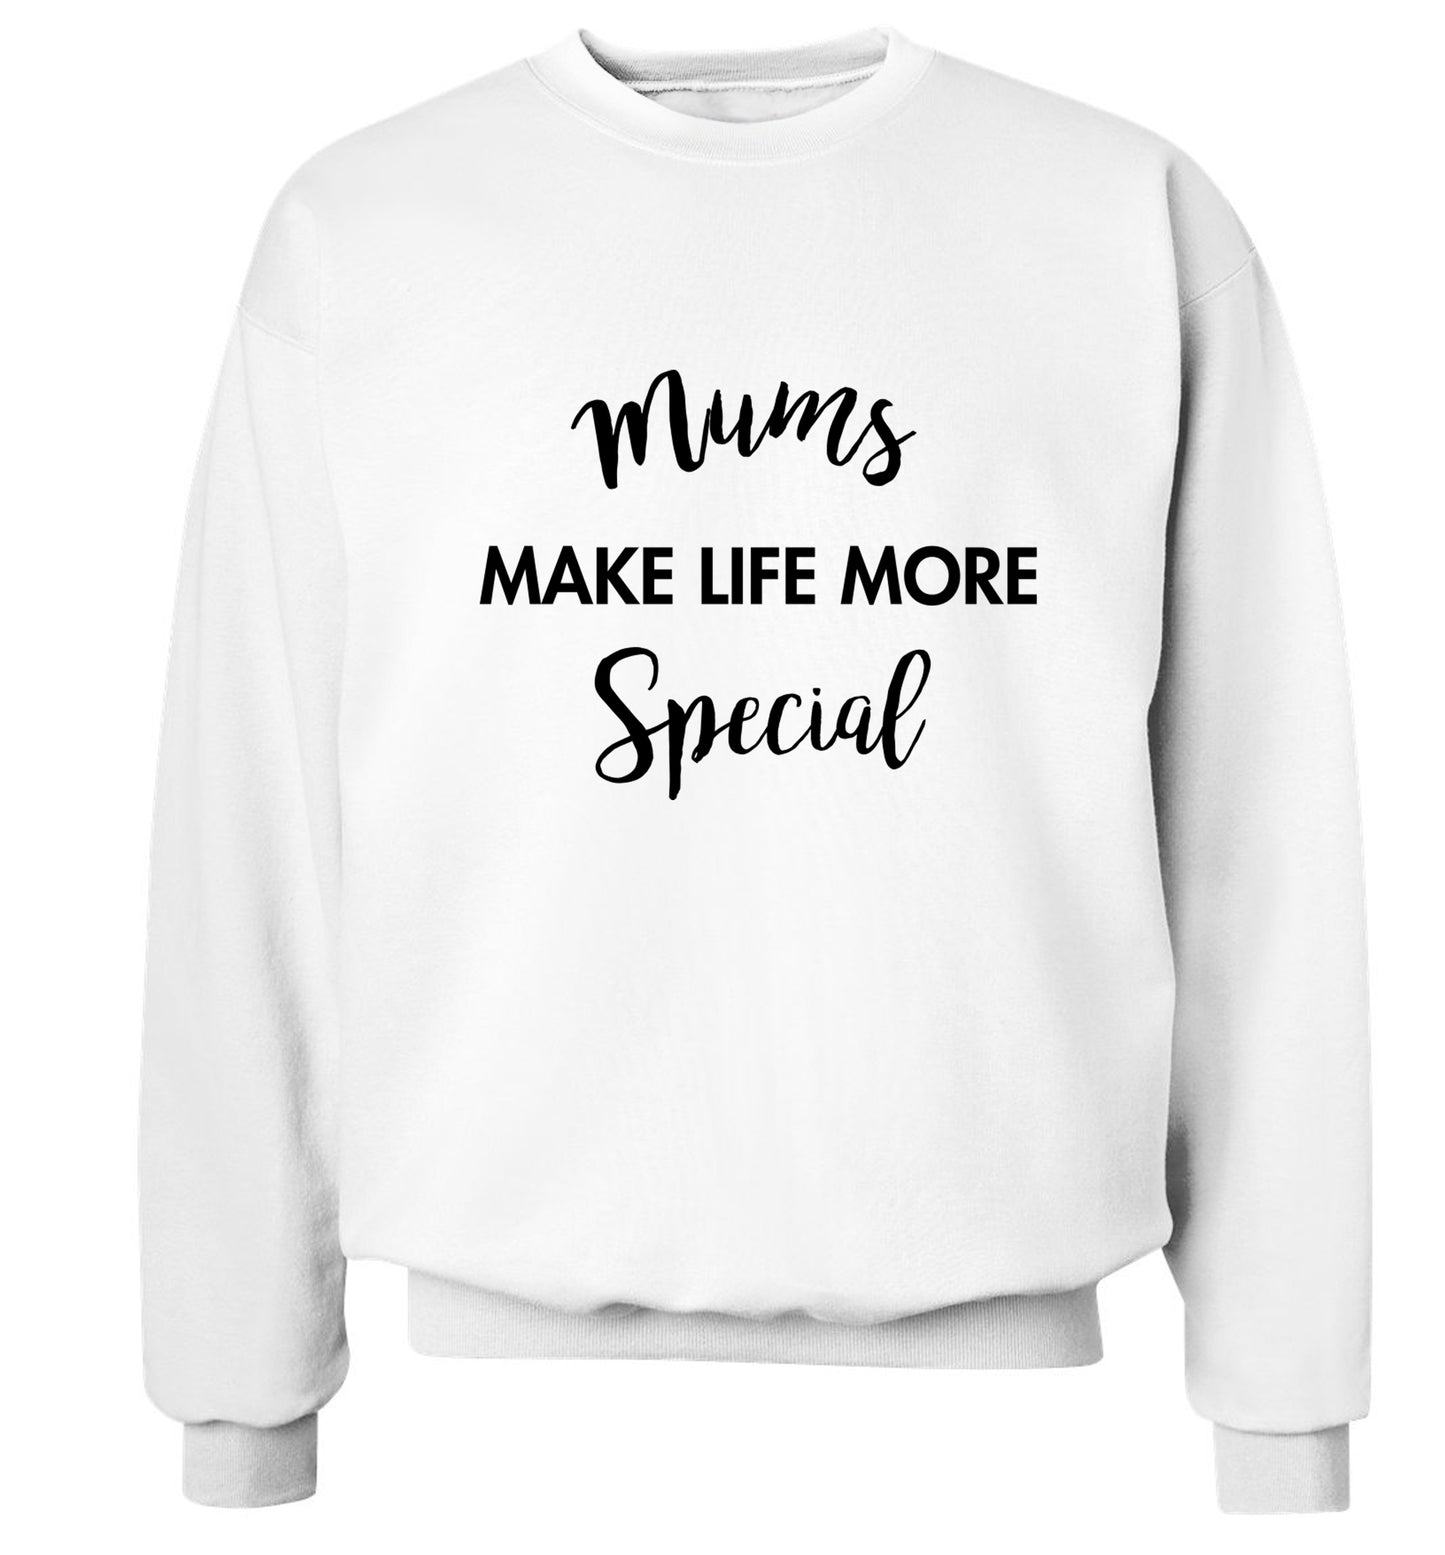 Mum's make life more special adult's unisex white sweater 2XL